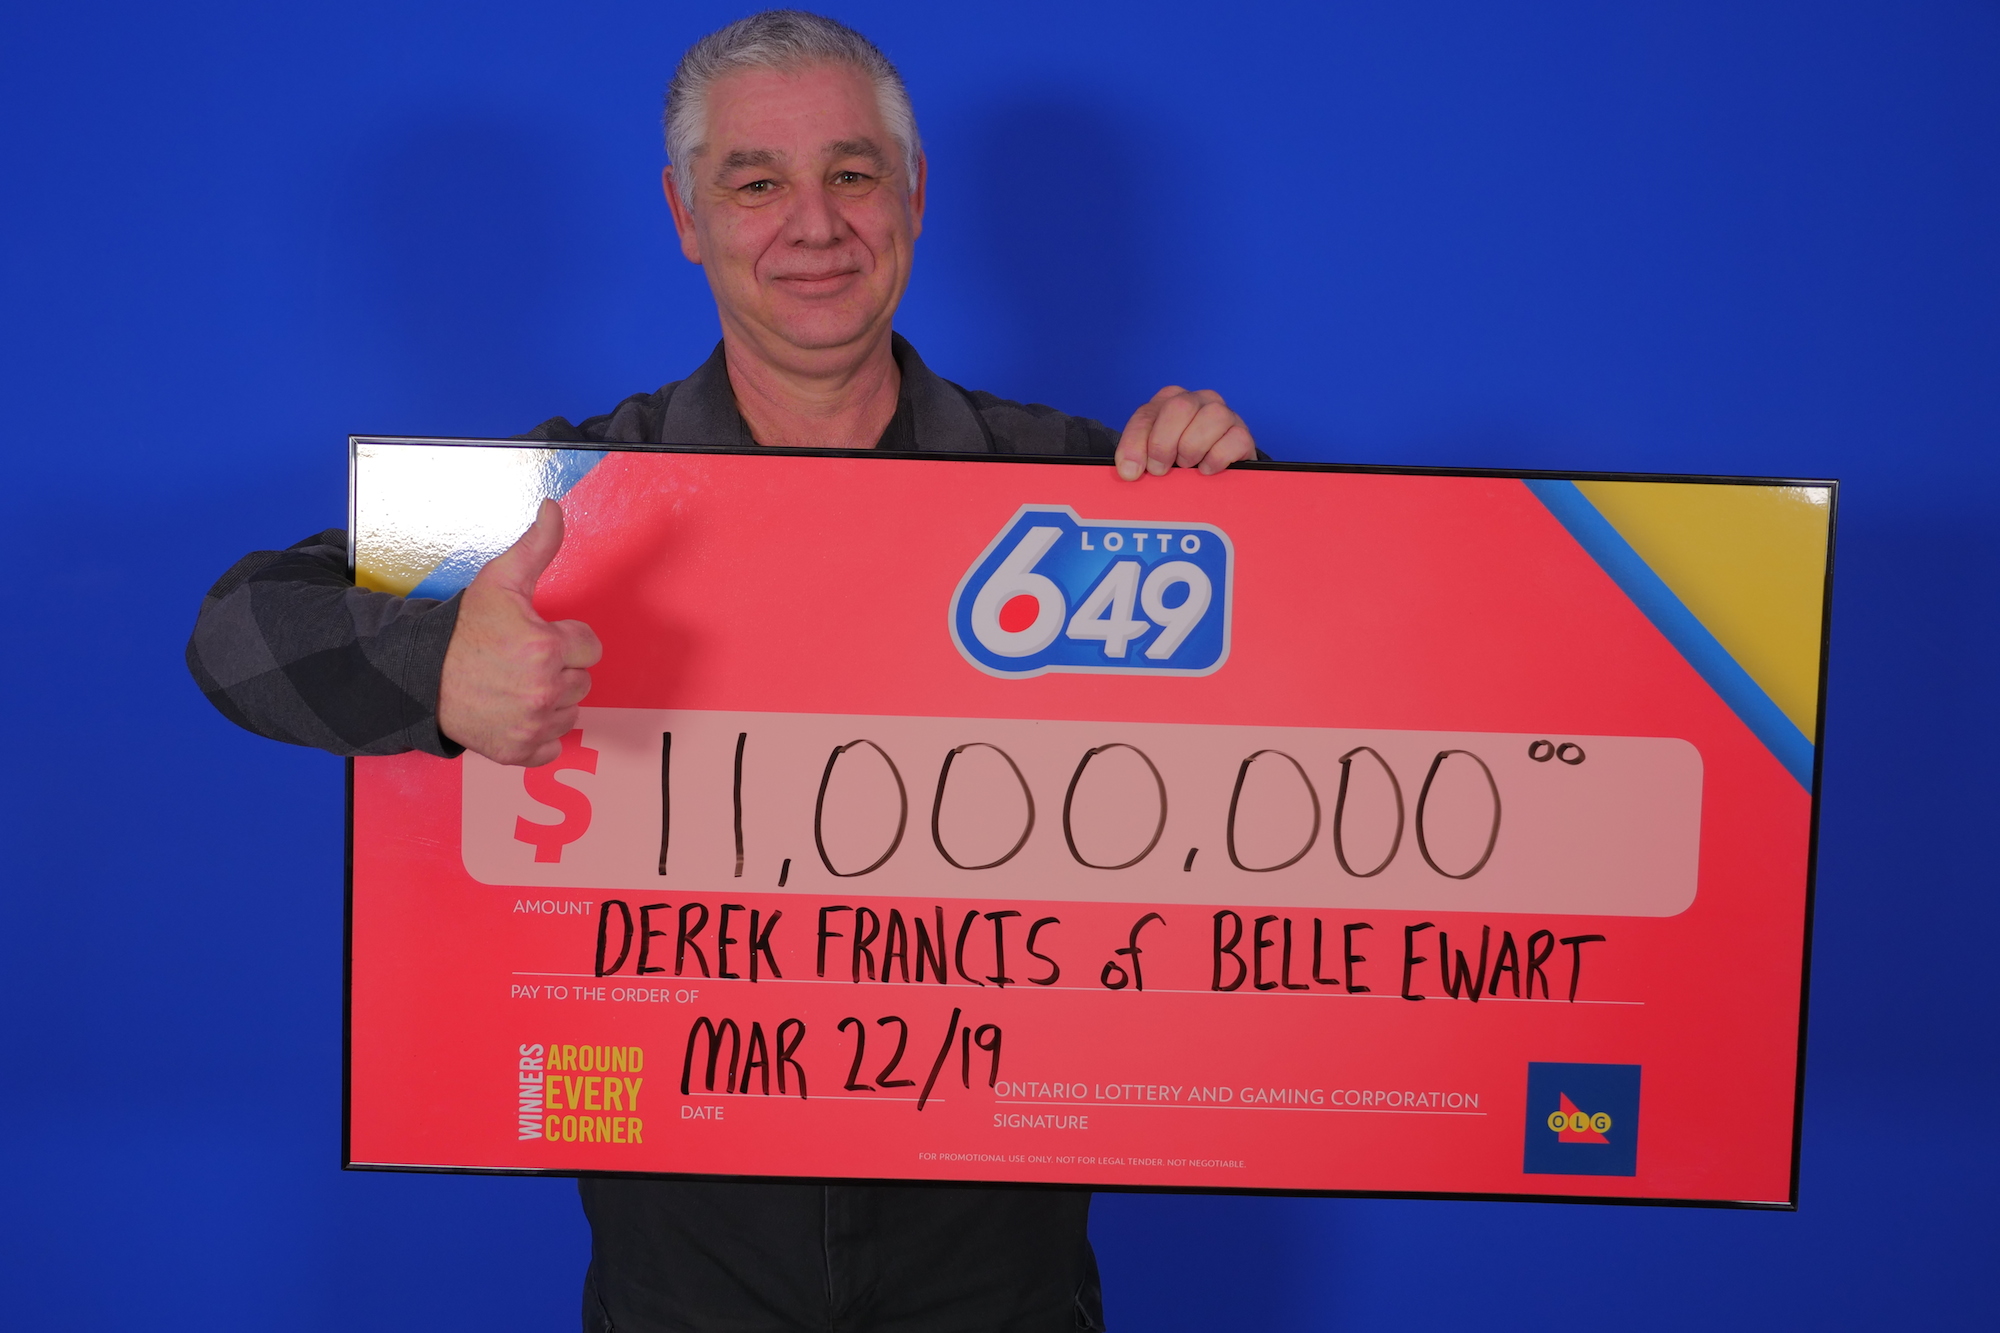 lotto 649 winning numbers march 20 2019